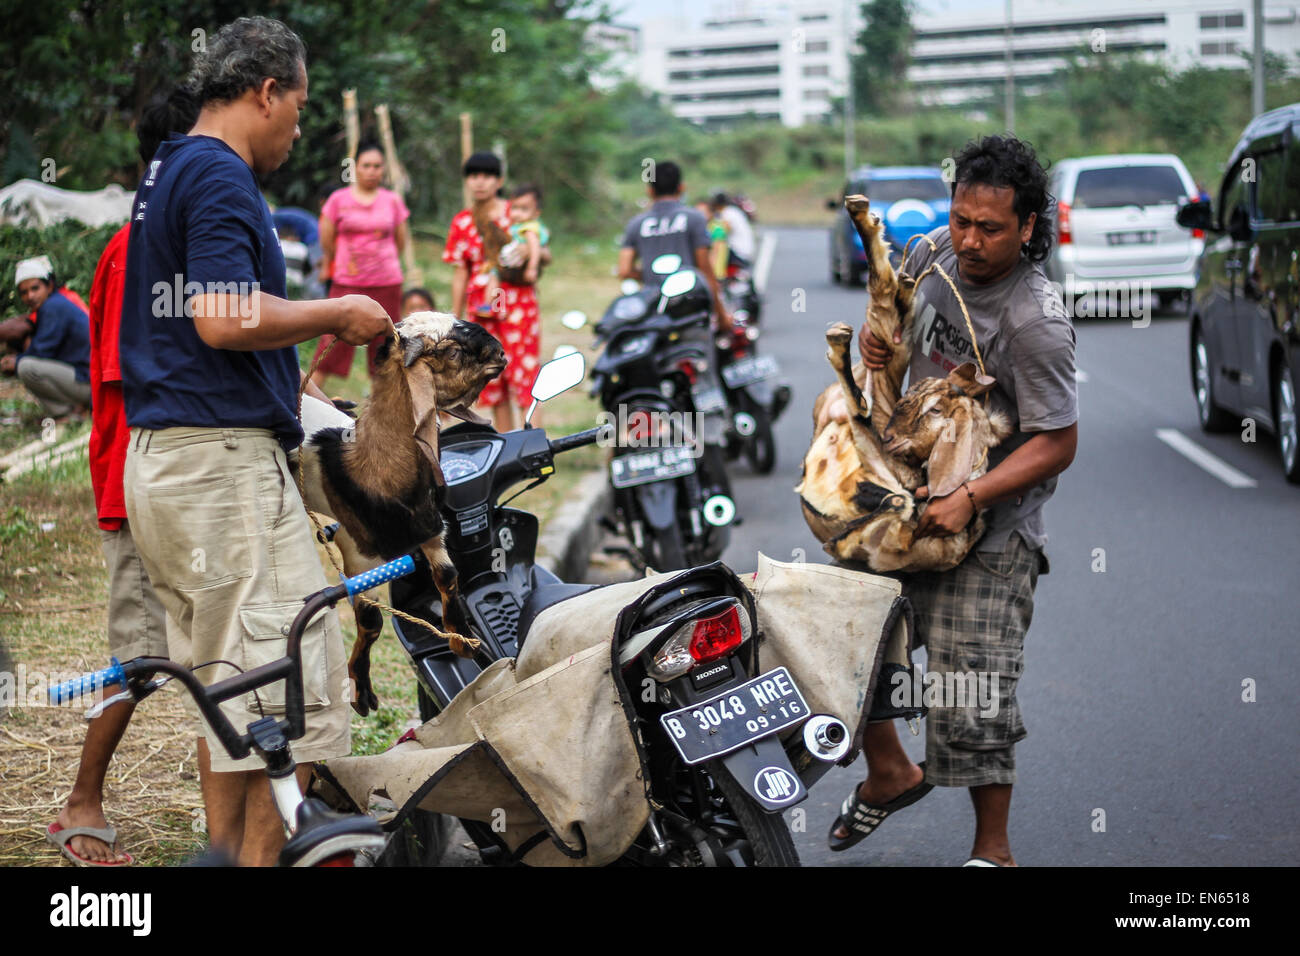 Tangerang, Indonesia. 28th Sep, 2014. A man carries home a small goat after Eid al-Adha prayers at Asmaul Husna Masjid. Eid al-Adha, also known as the Feast of Sacrifice, commemorates prophet Abraham's willingness to sacrifice his son as an act of obedience to God, who in accordance with tradition then provided a lamb in the boy's place. © Garry Andrew Lotulung/Pacific Press/Alamy Live News Stock Photo